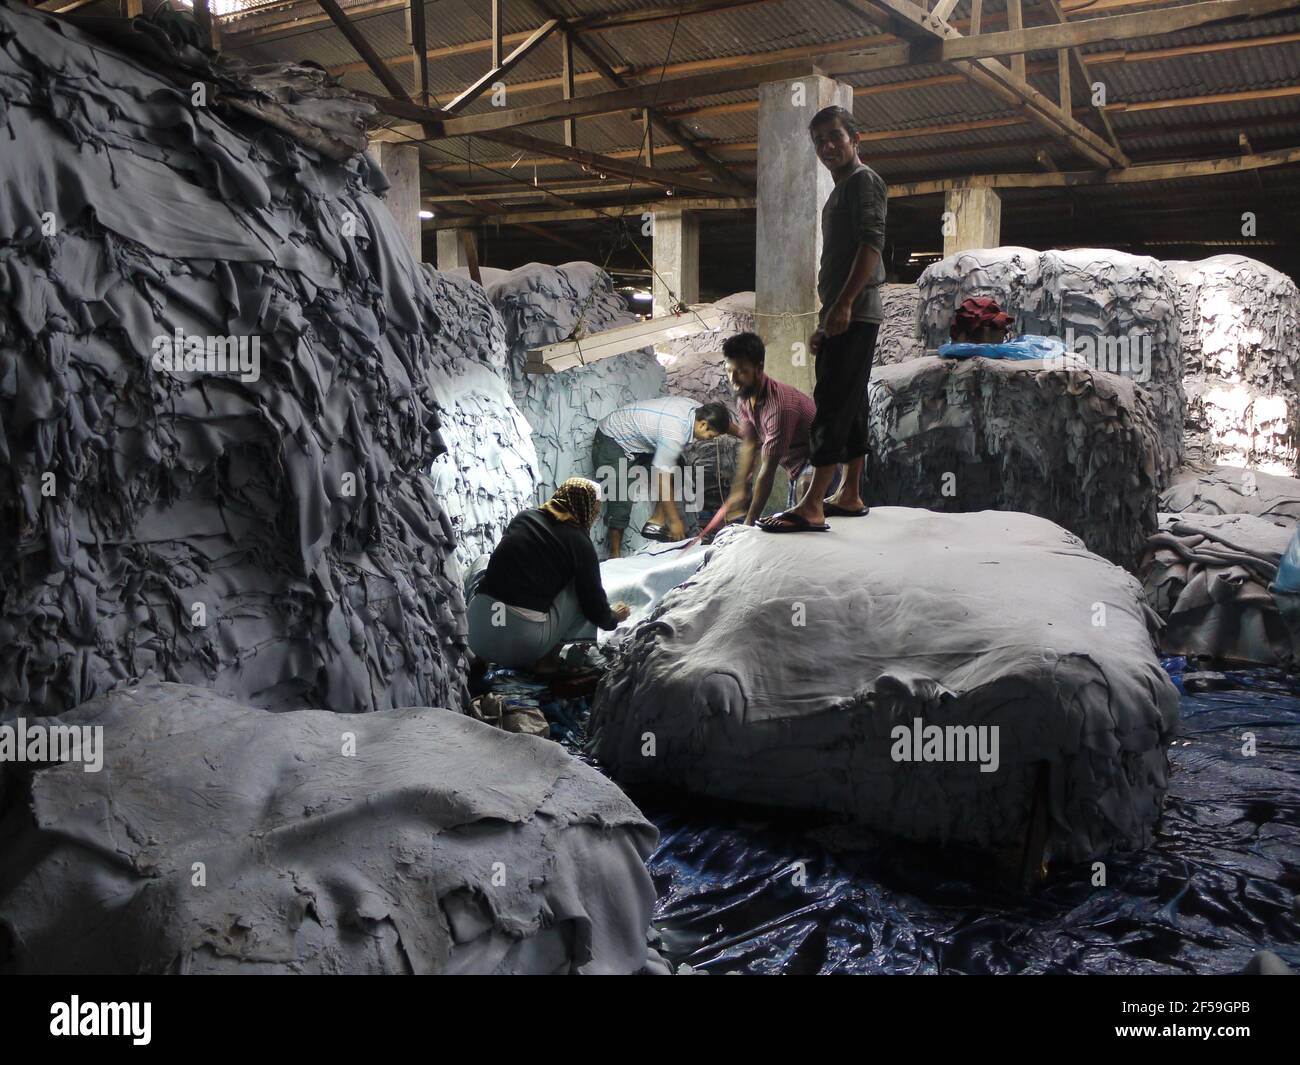 Workers inside a tannery in district of Hazaribagh, Dhaka, Bangladesh, where skin are washed to produce leather Stock Photo